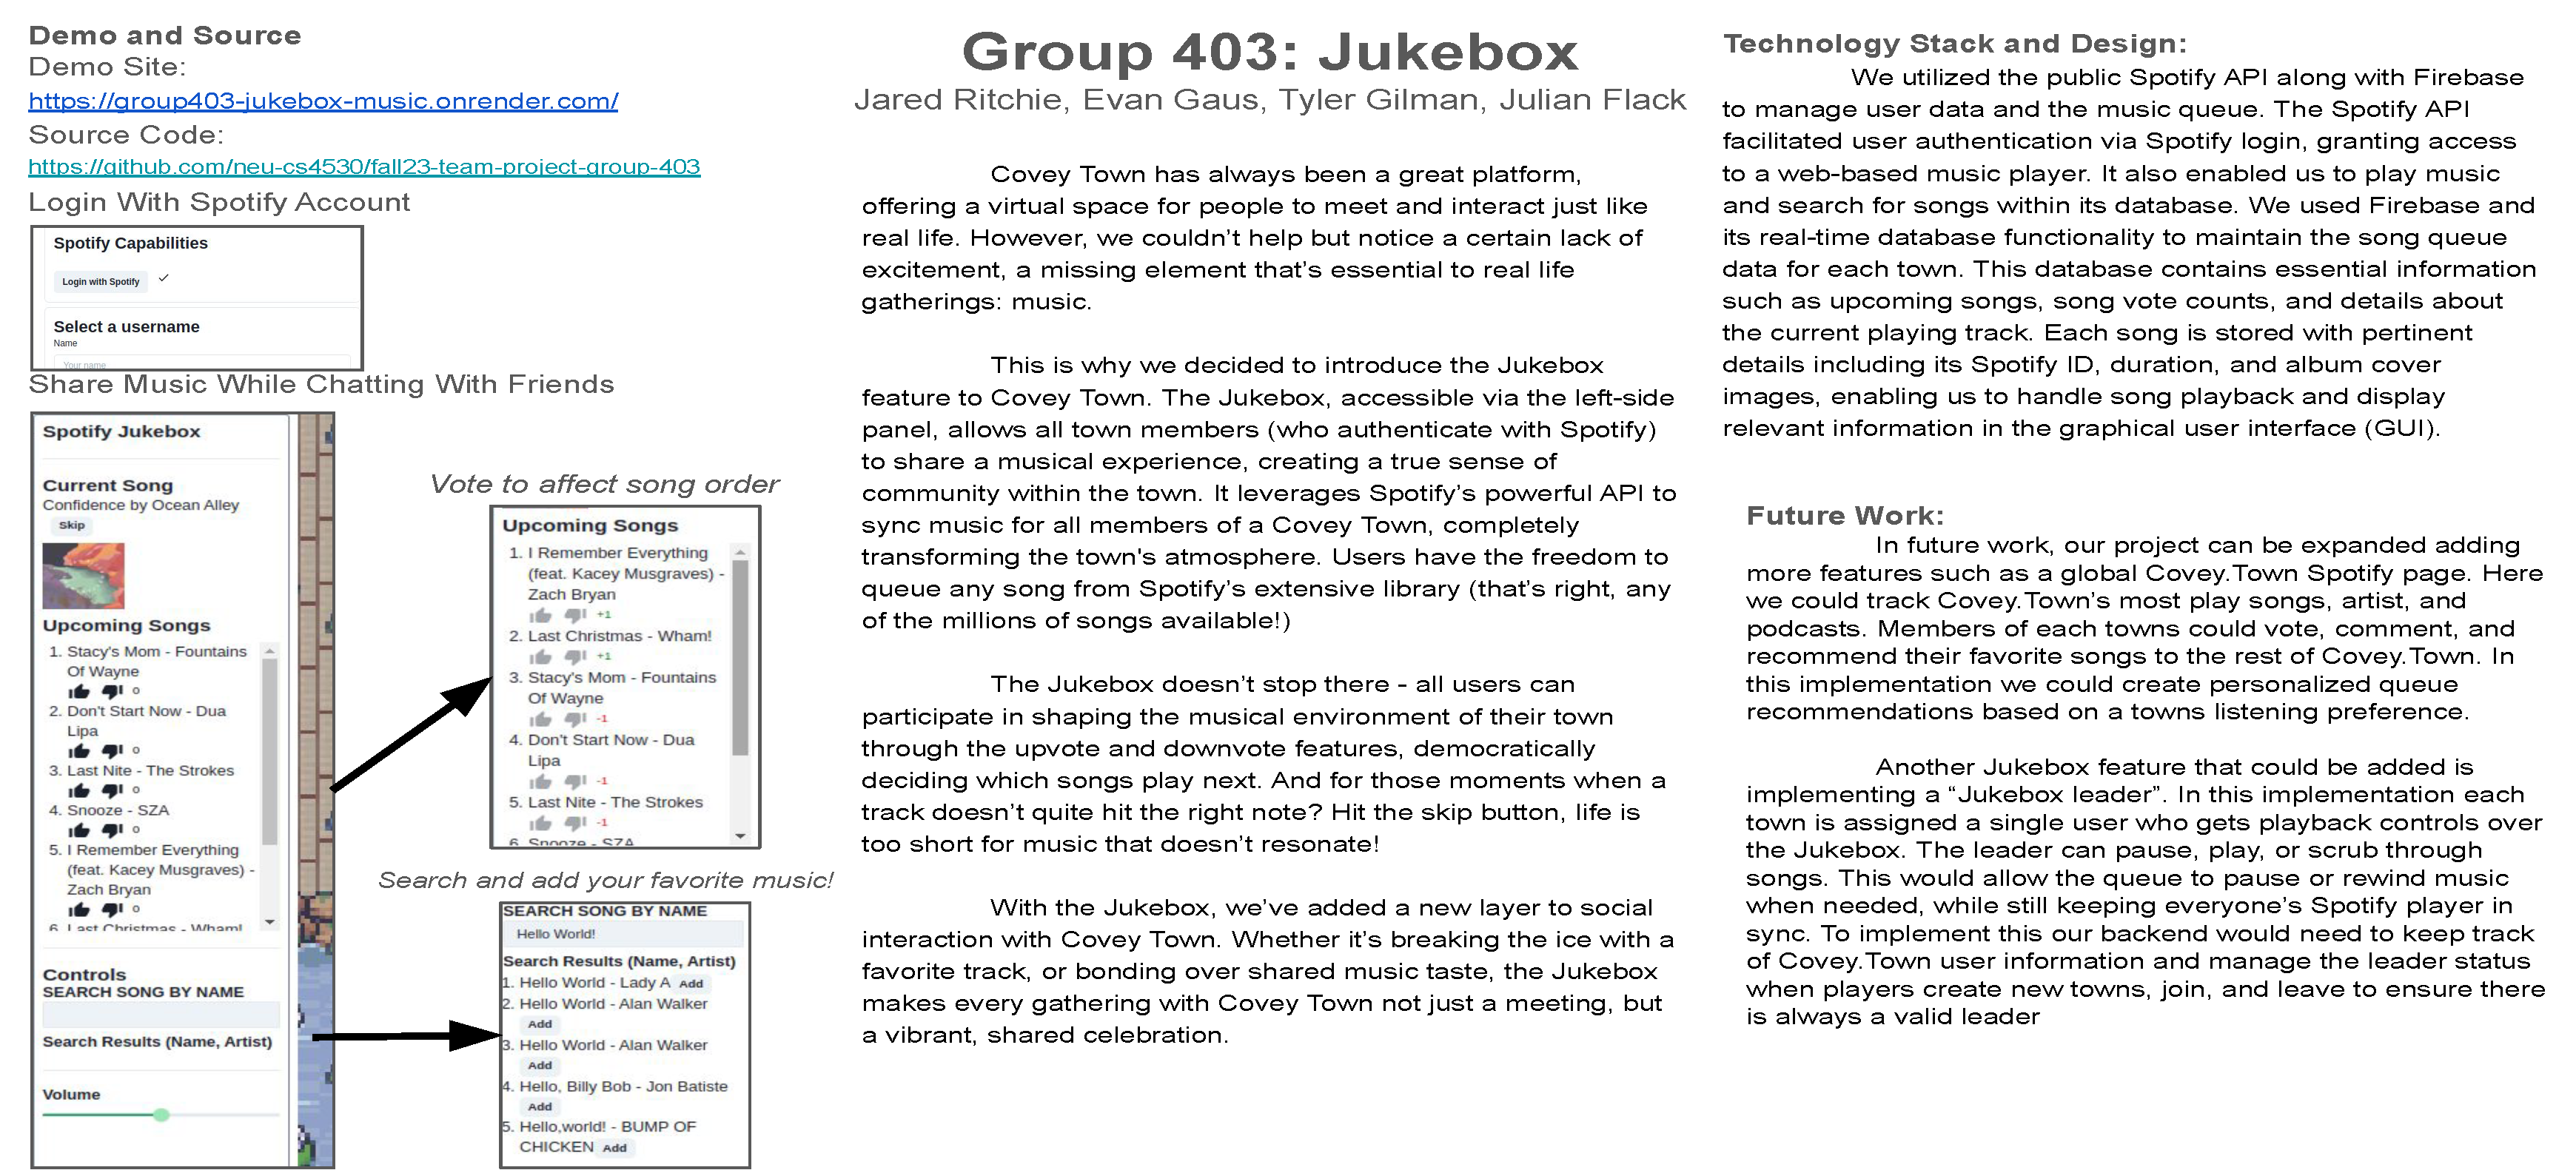 Group 403 Poster